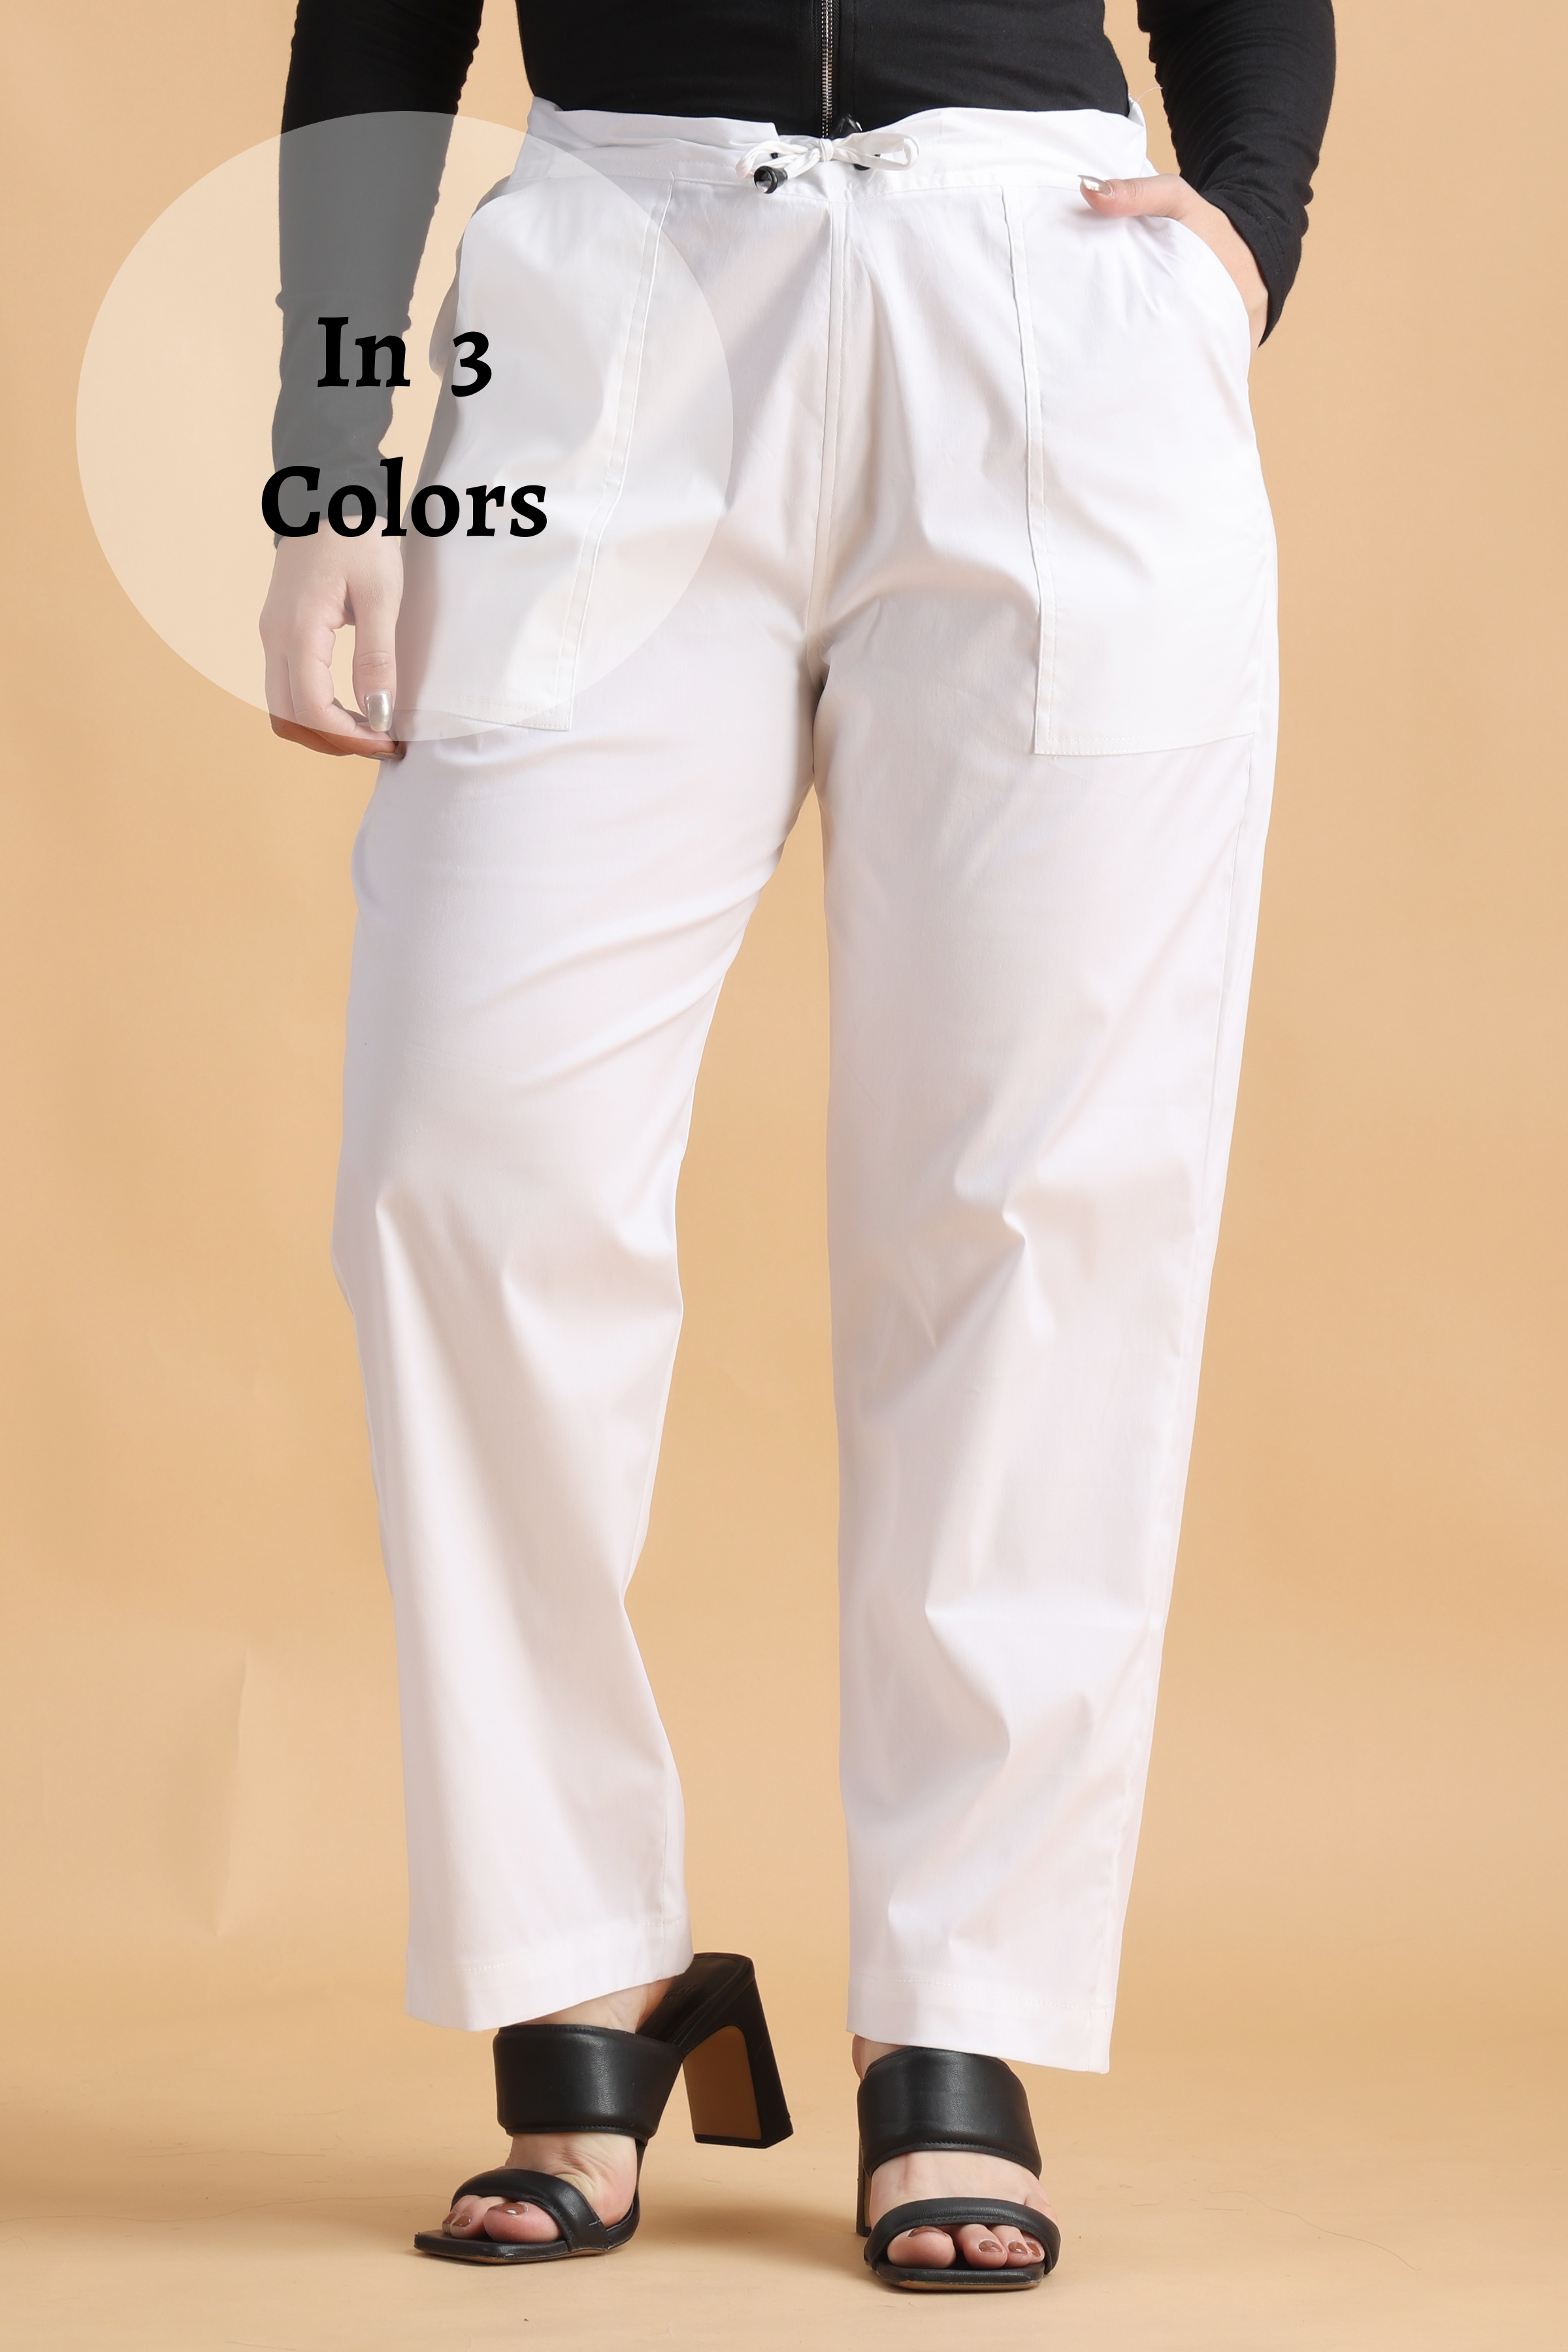 Female cotton lekra Lucknowi Chikankari Stretchable Lycra Pant, white, free  at Rs 270/piece in Lucknow